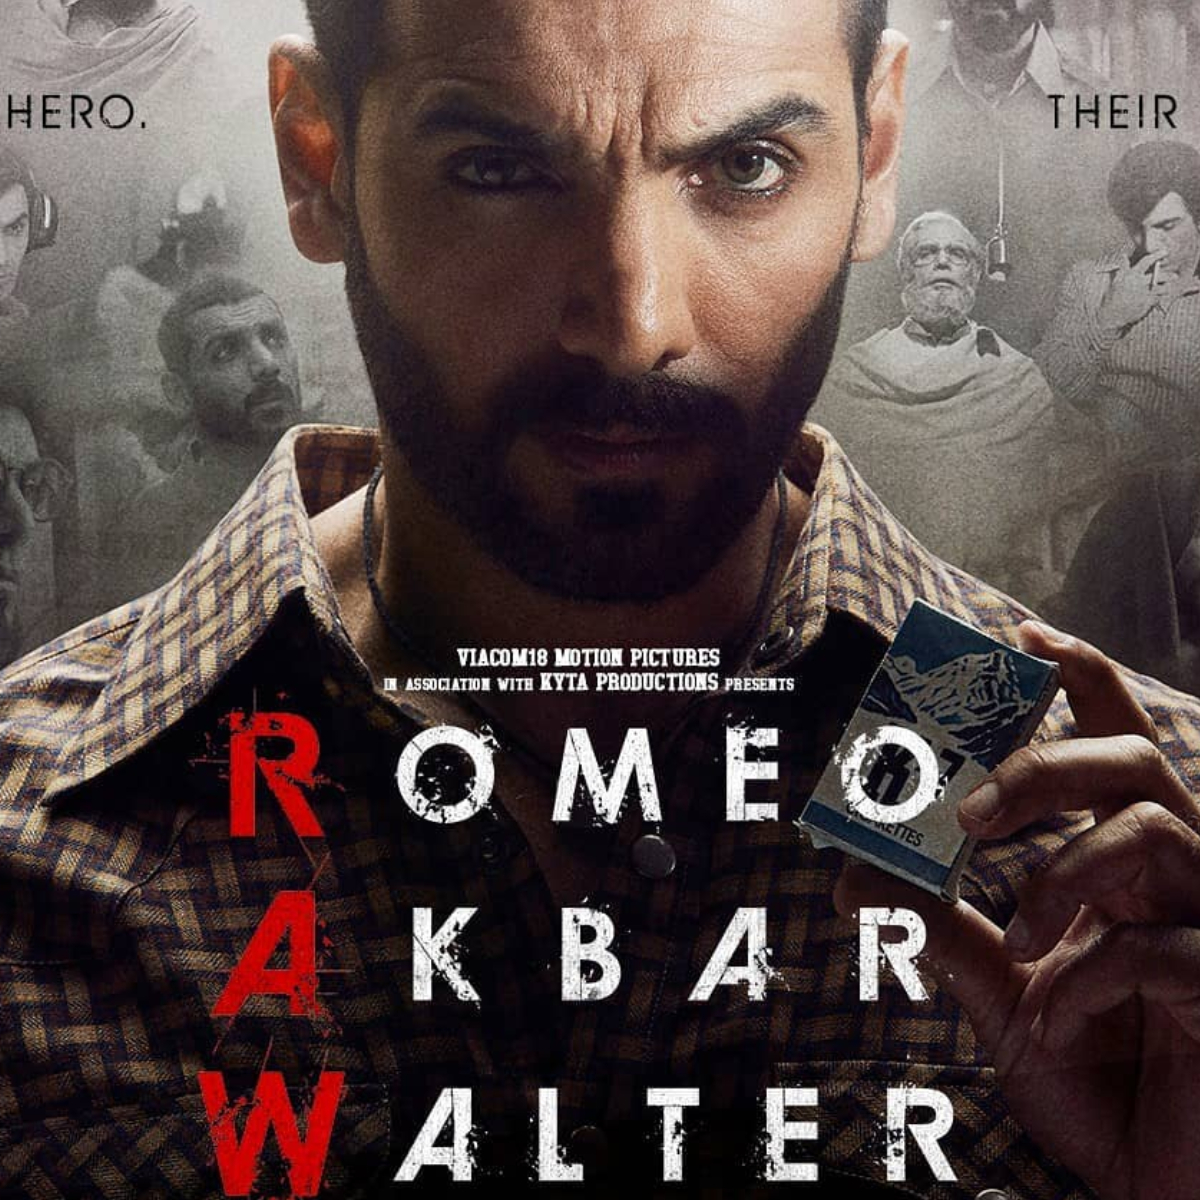 Romeo Akbar Walter Box Office Collection Day 8: John Abraham starrer fares well as no big movie releases